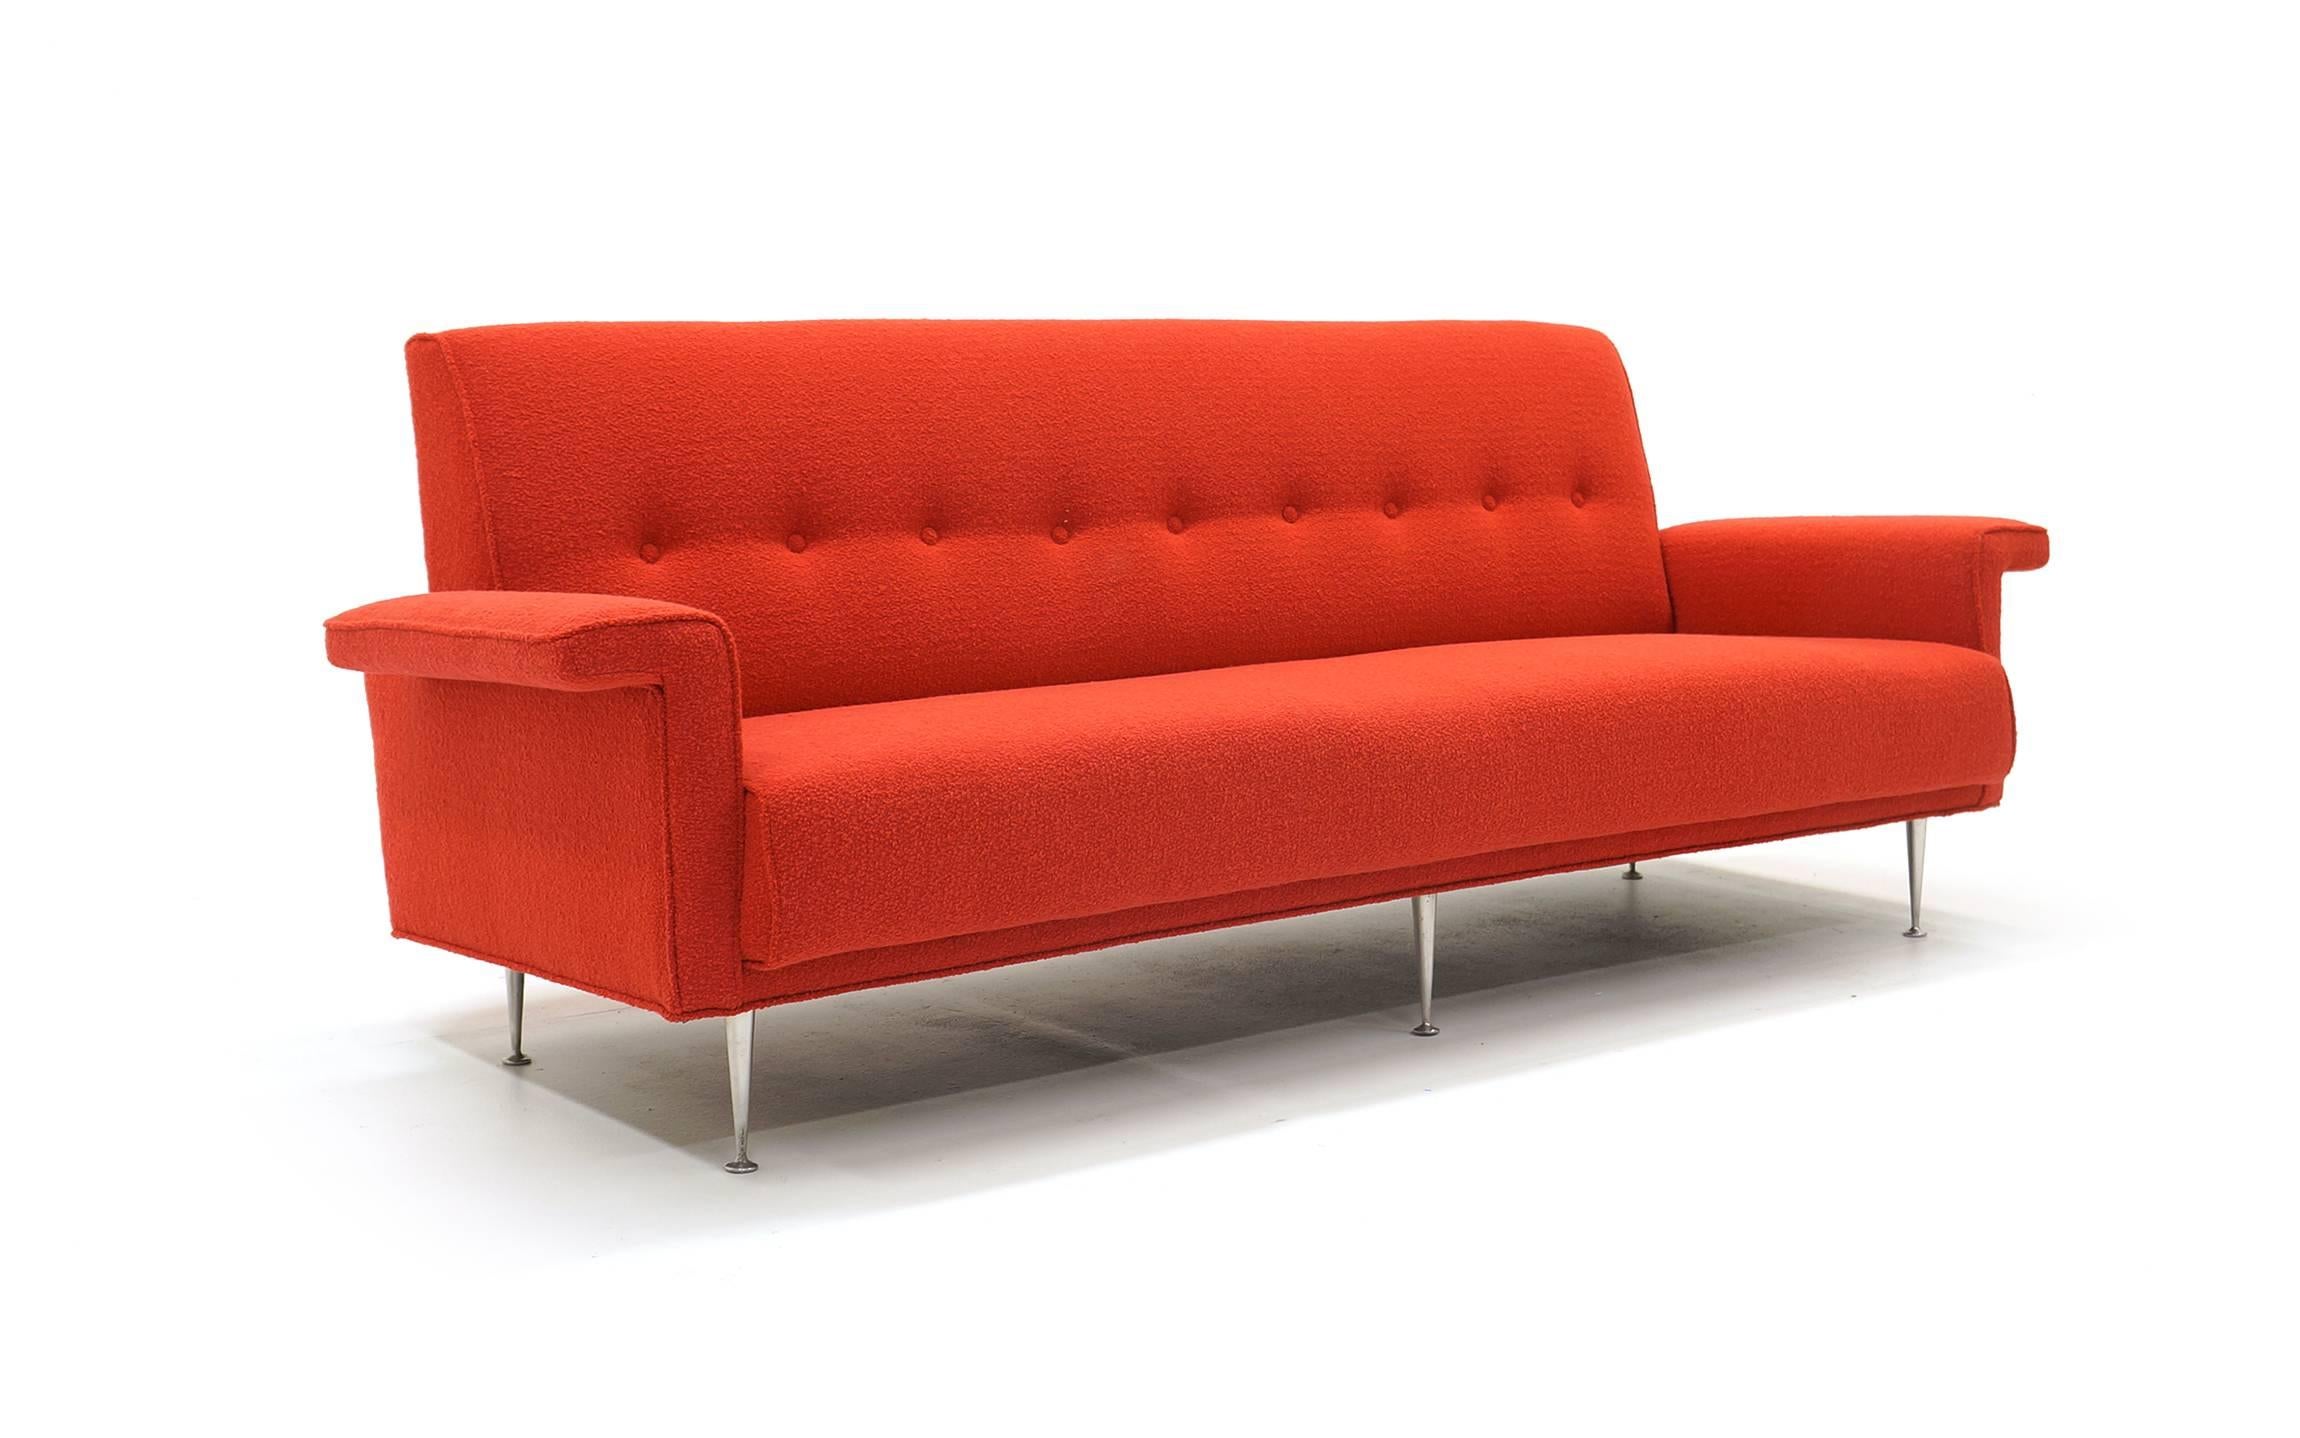 Extremely rare, produced for only one year, sofa designed by George Nelson for Herman Miller (As with much George Nelson seating it was designed in the Nelson office with John F. Pile). Expertly restored and reupholstered in a red (Crimson) Knoll